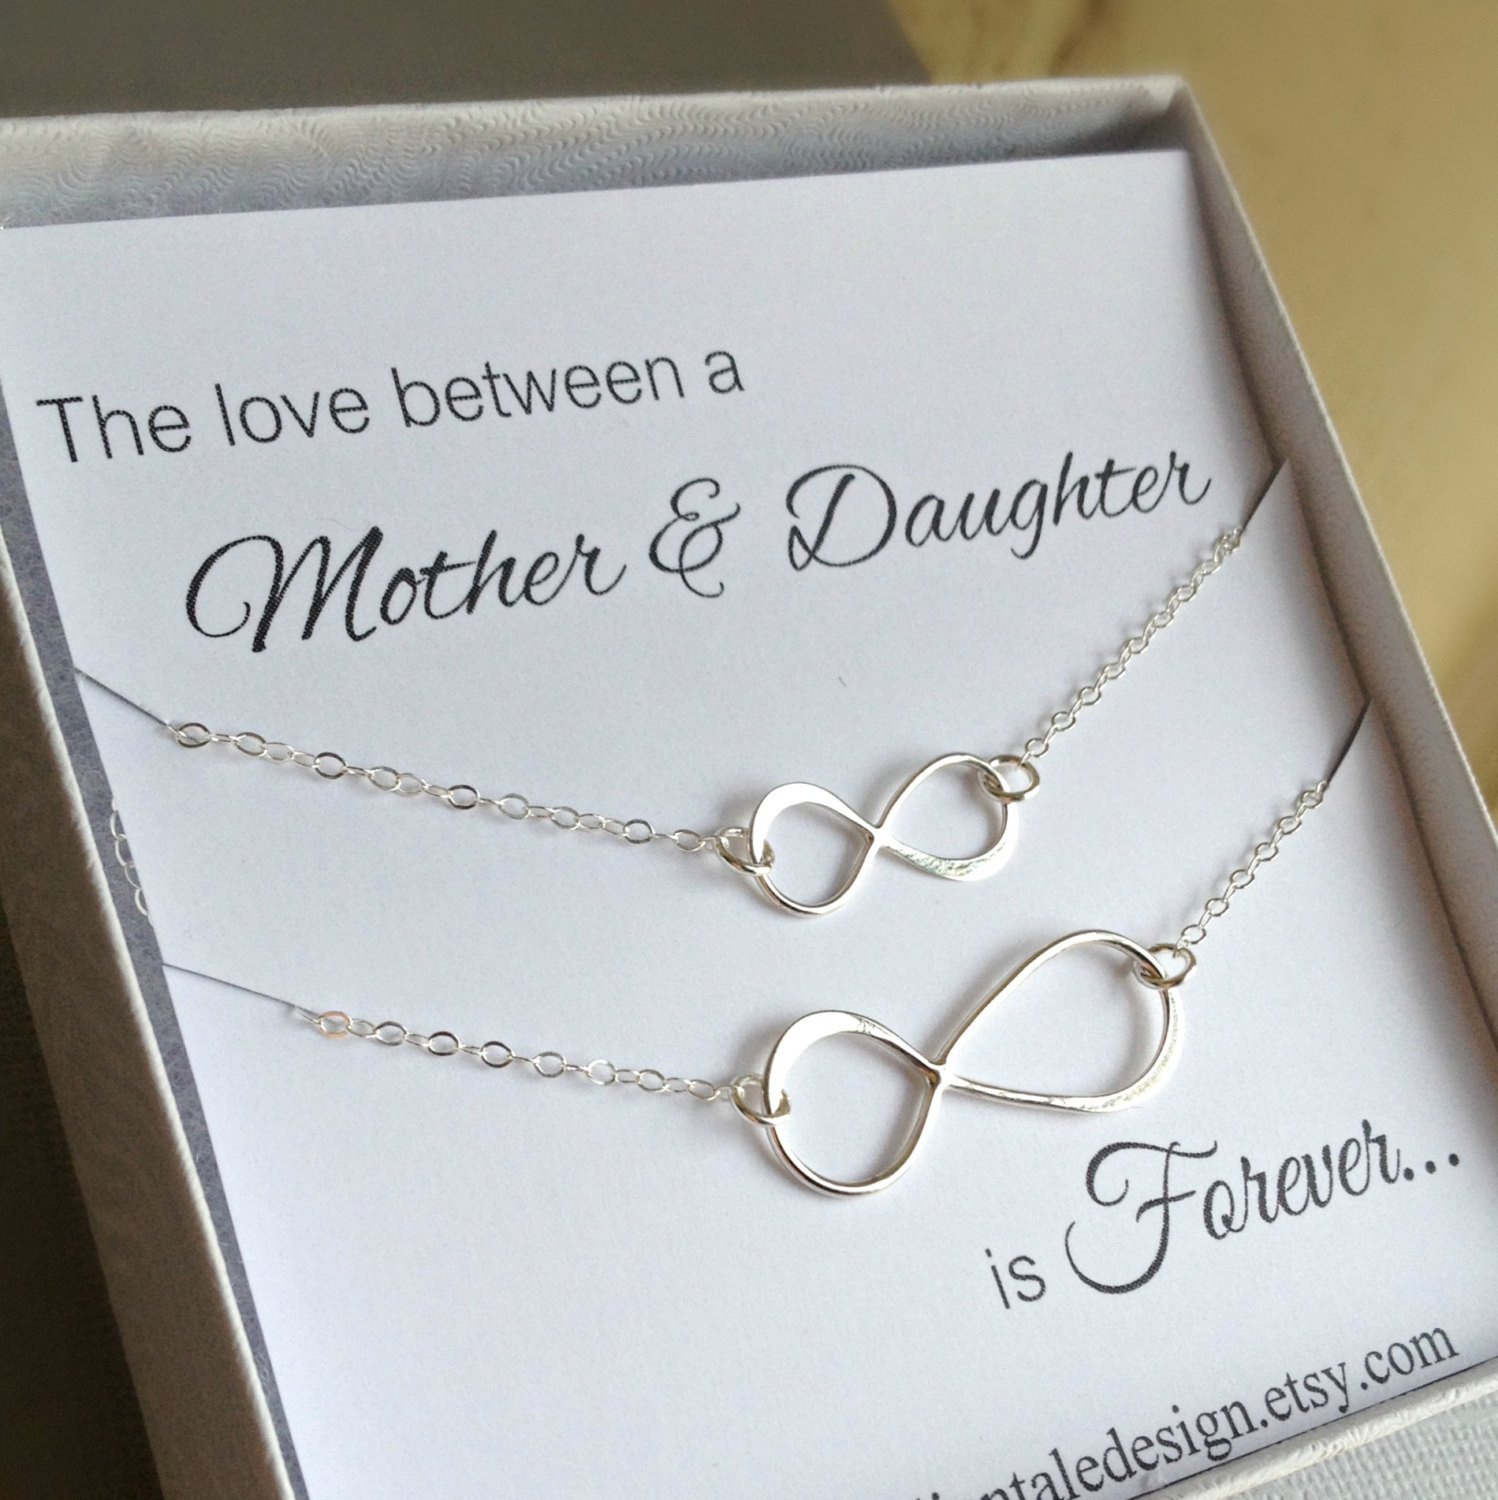 Mother Daughter Necklace Set
 Mother Daughter Necklace Set Infinity by anatoliantaledesign